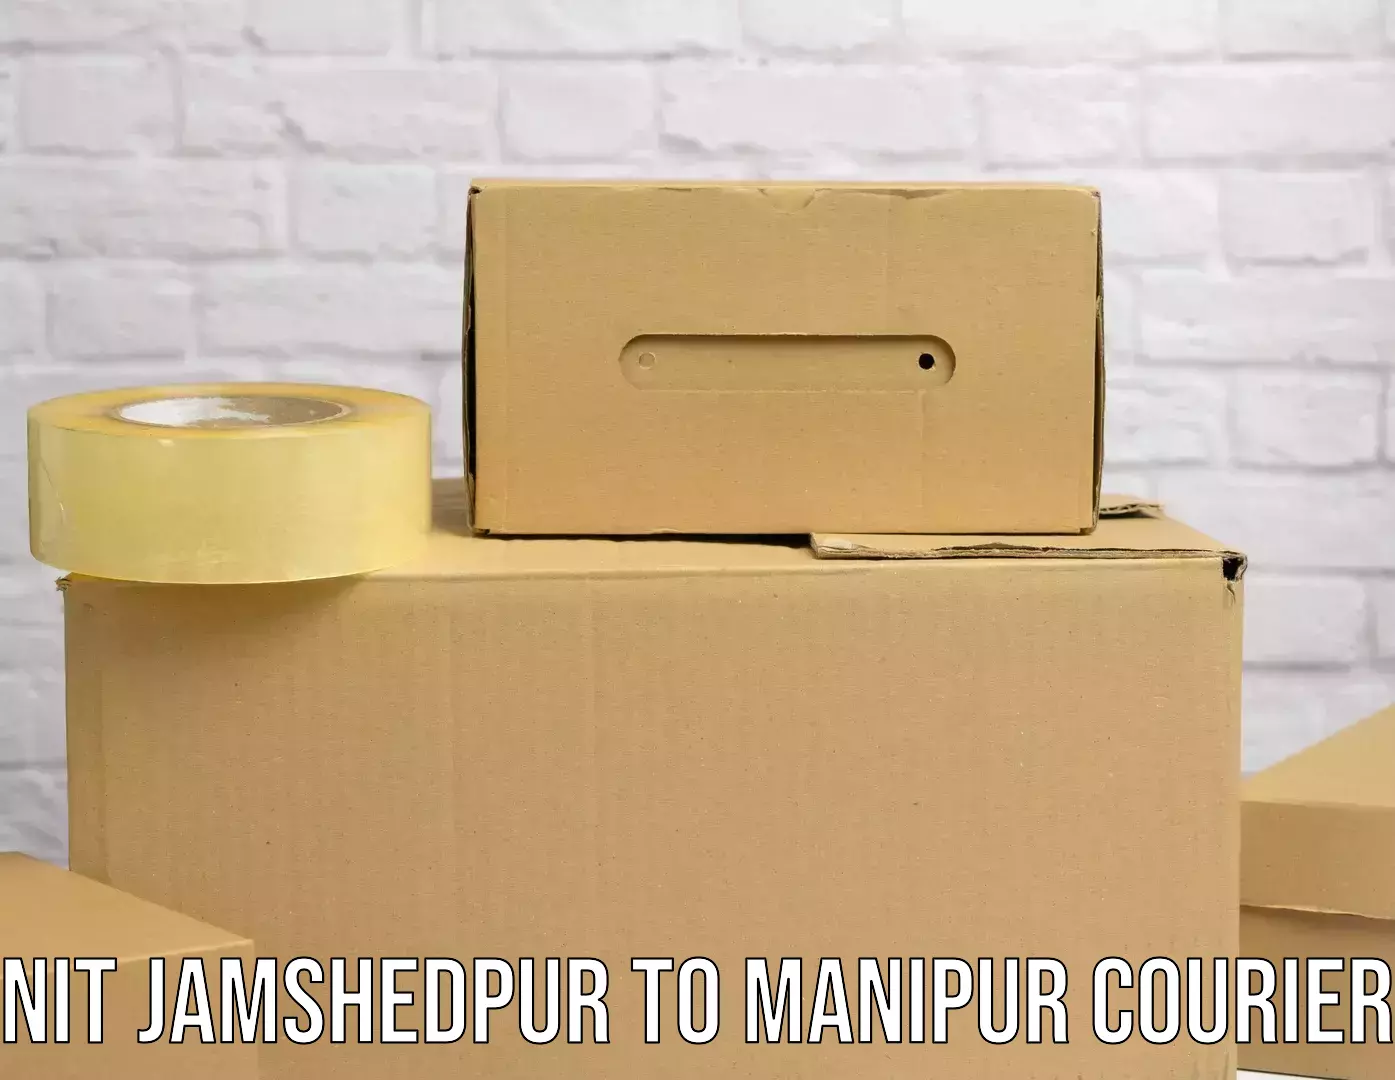 Reliable courier service NIT Jamshedpur to Imphal